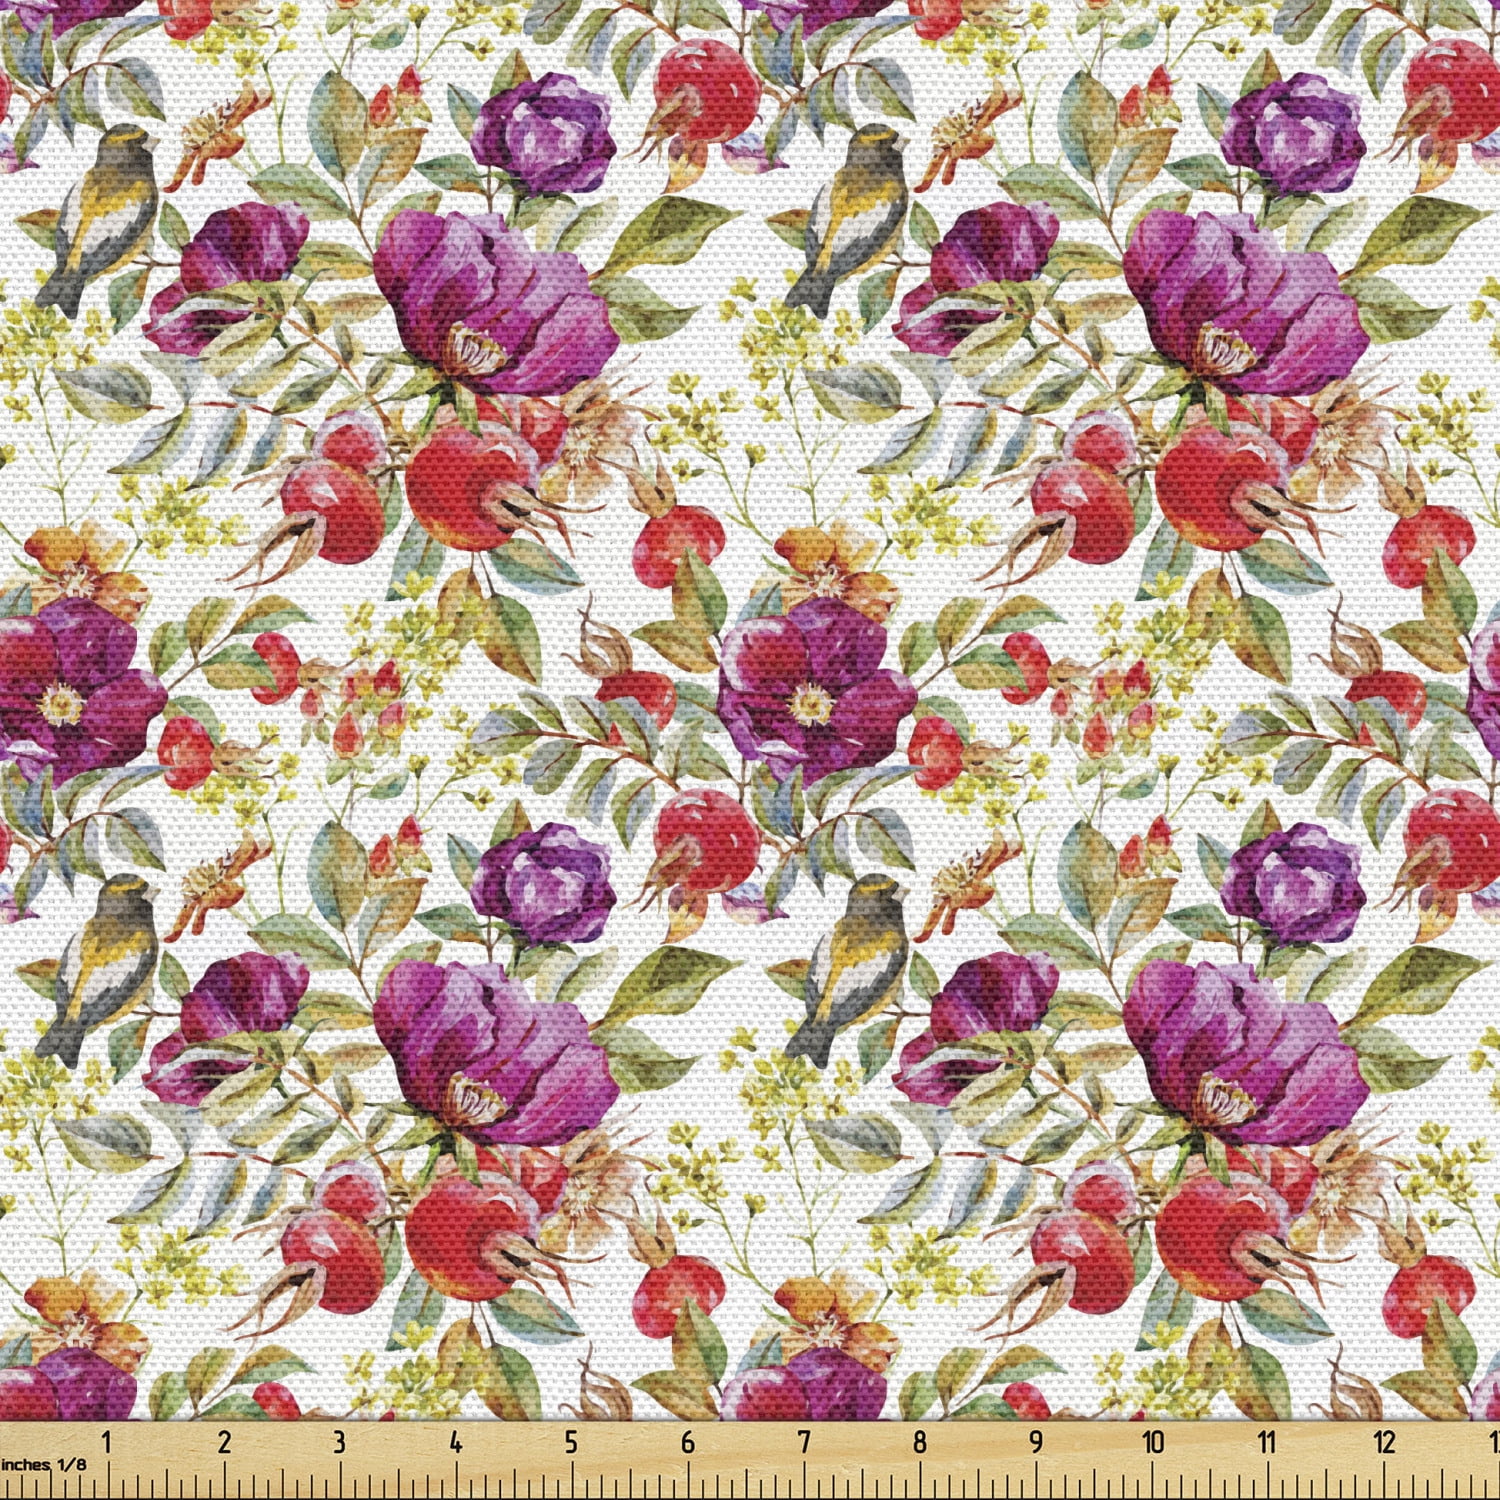 Floral Fabric by the Yard, Hot Pink Purple Colored Flowers with Leaves ...